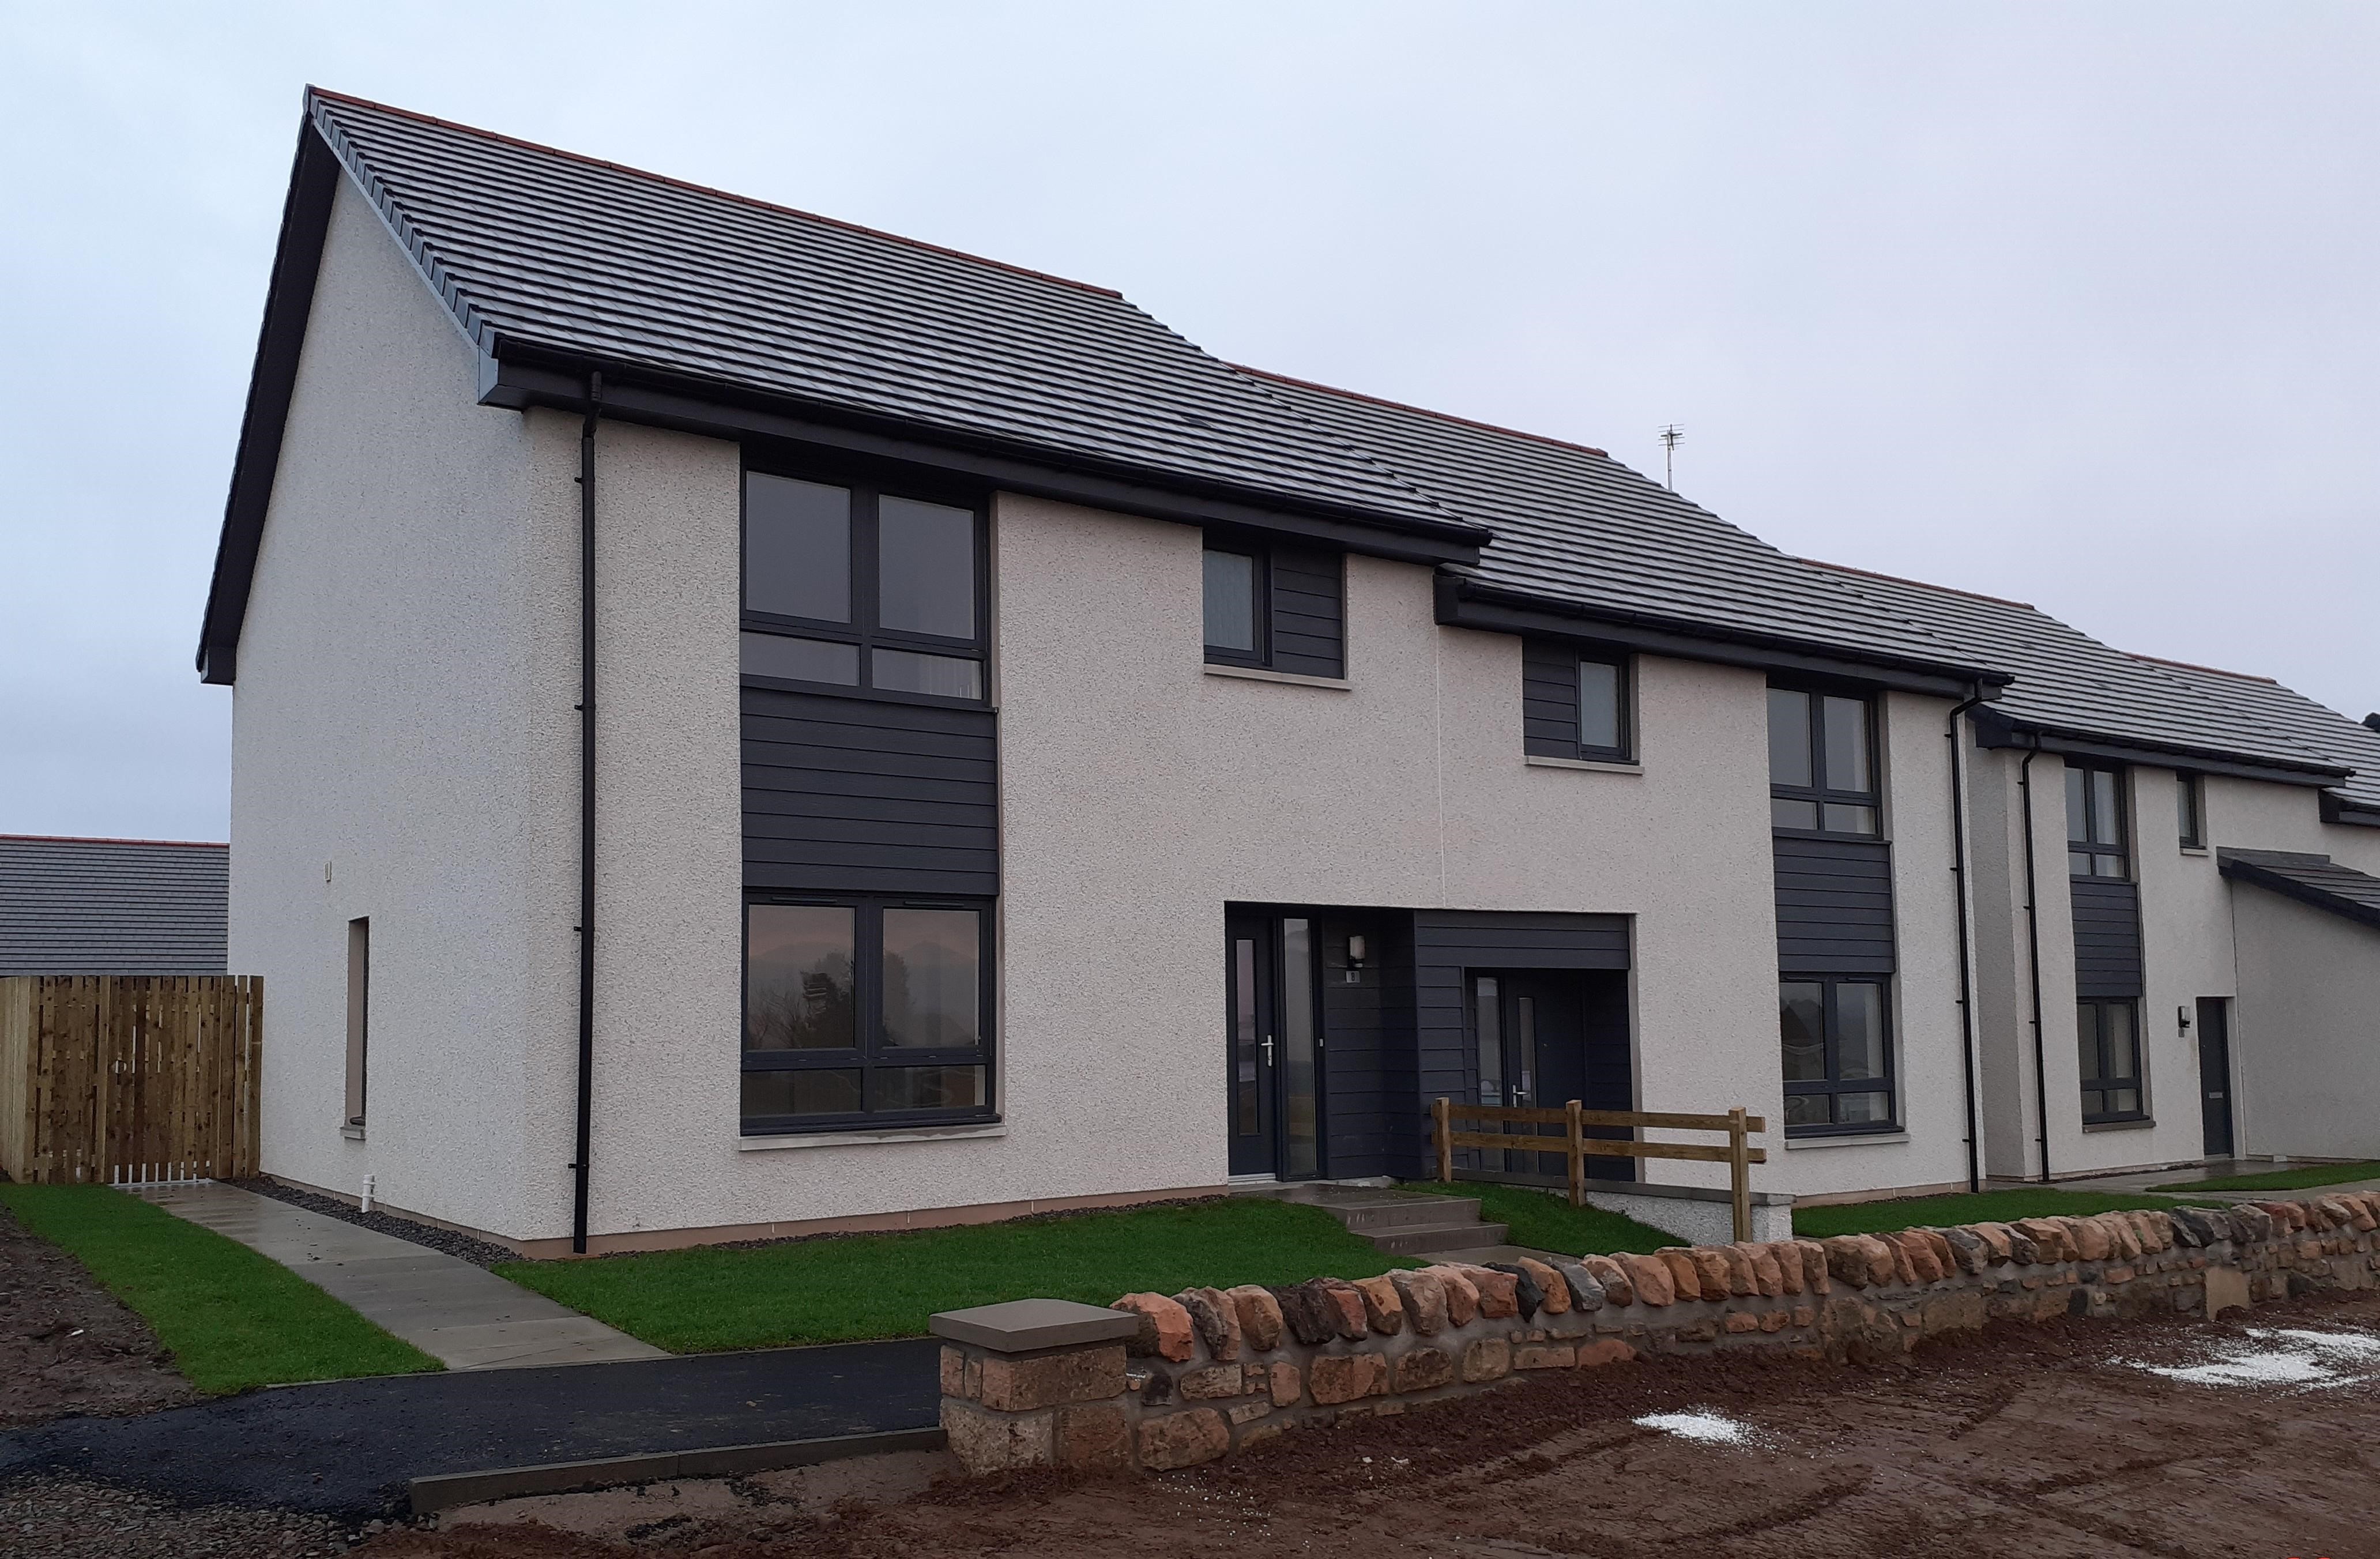 Aberdeenshire LDP identifies sites for hundreds of new homes